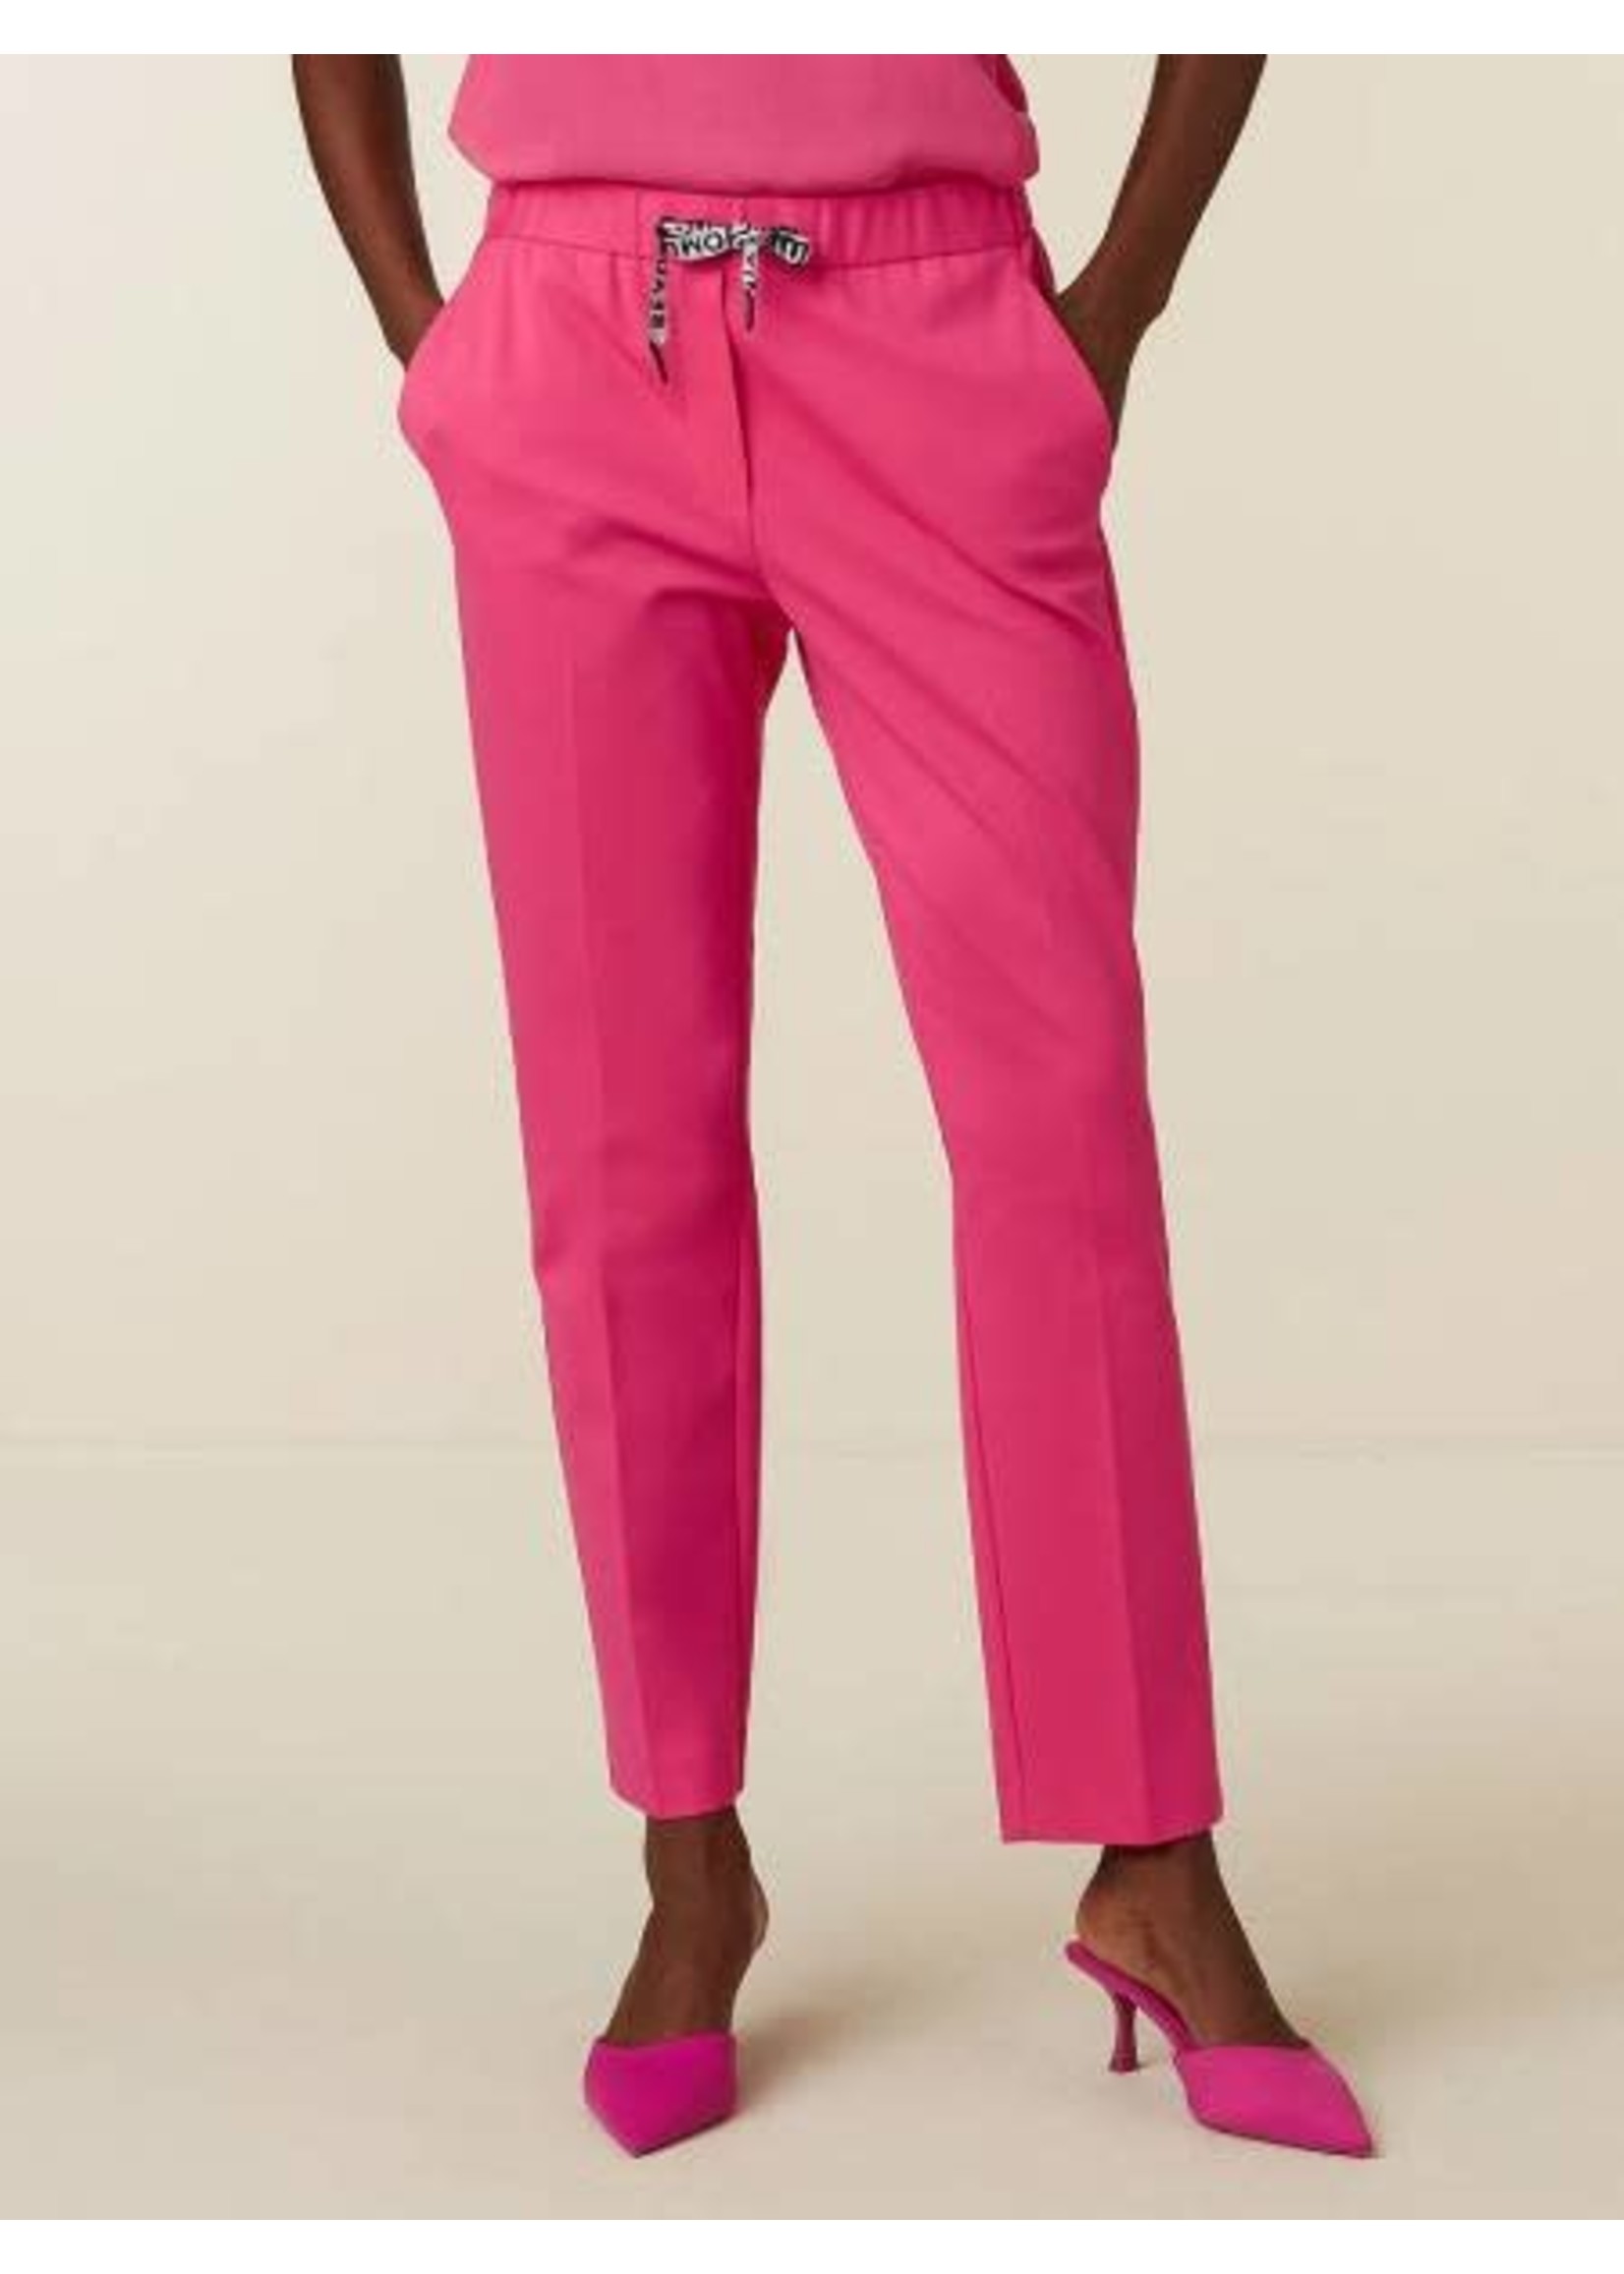 Beaumont Beaumont - Nola Pants Chino Double Jersey - Pink